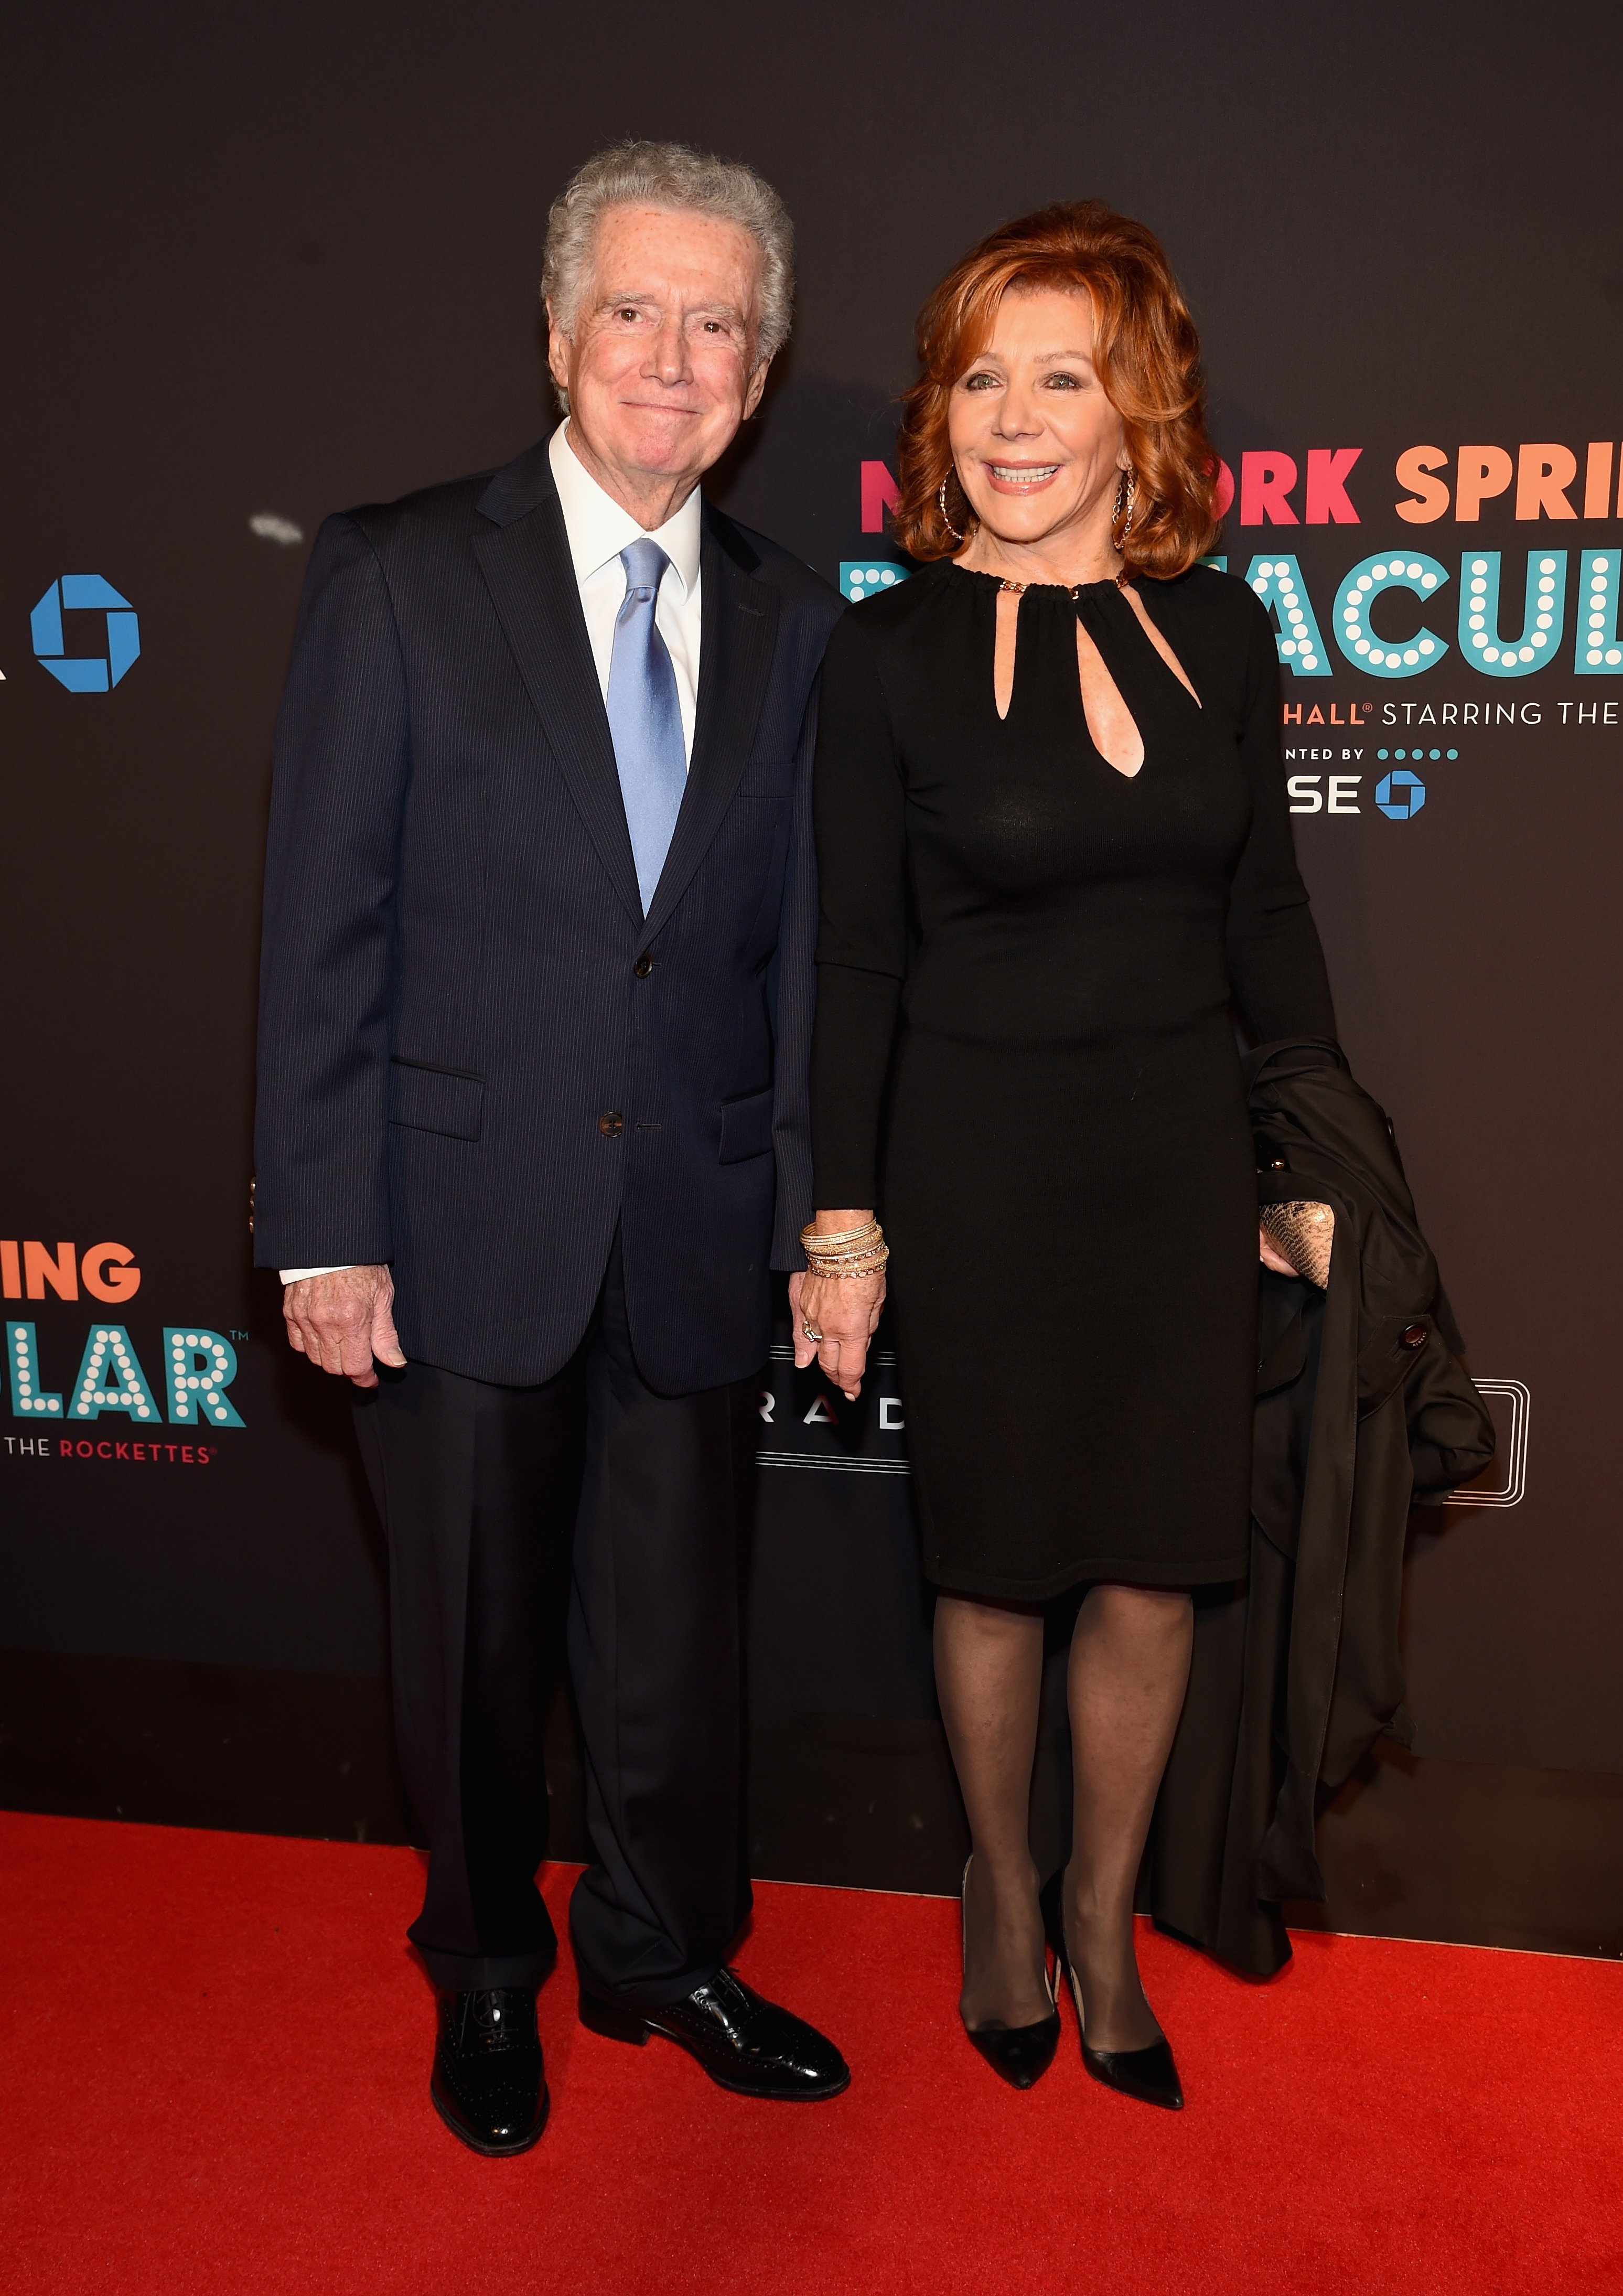 Regis and Joy Philbin attend the New York Spring Spectacular in New York City on March 26, 2015 | Photo: Getty Images